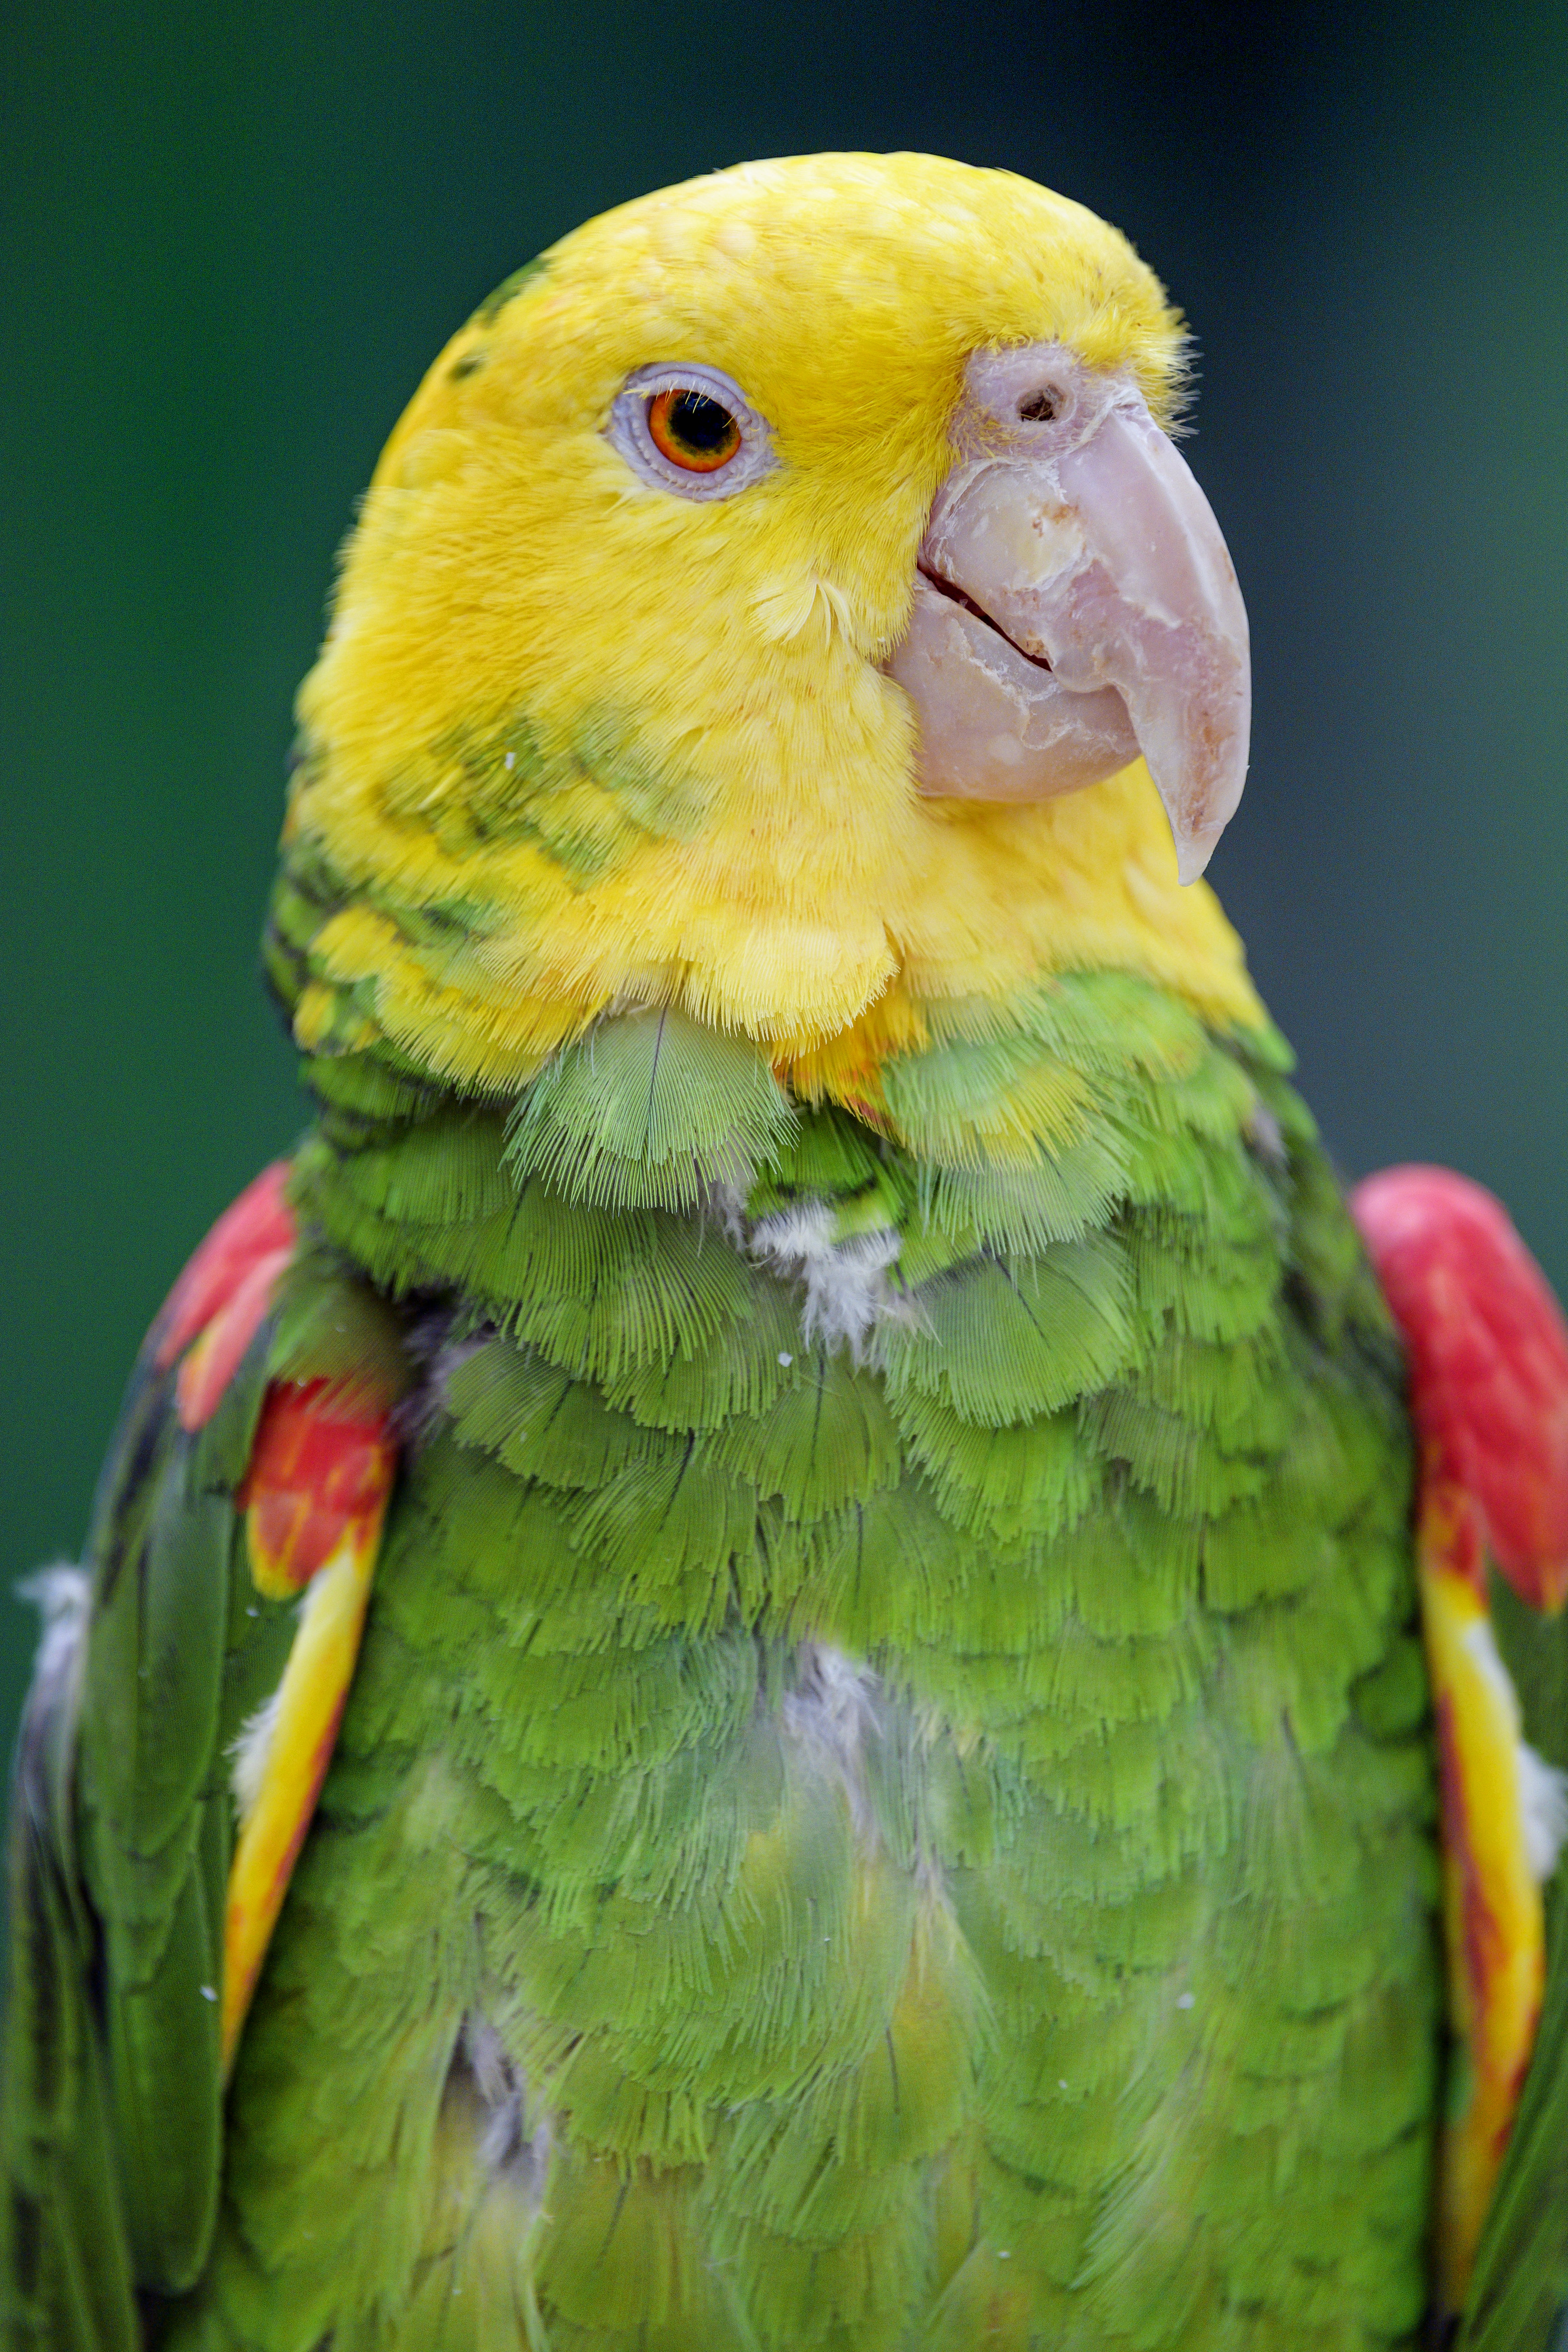 Wallpaper for mobile devices bird, animals, yellow-headed parrot, bright